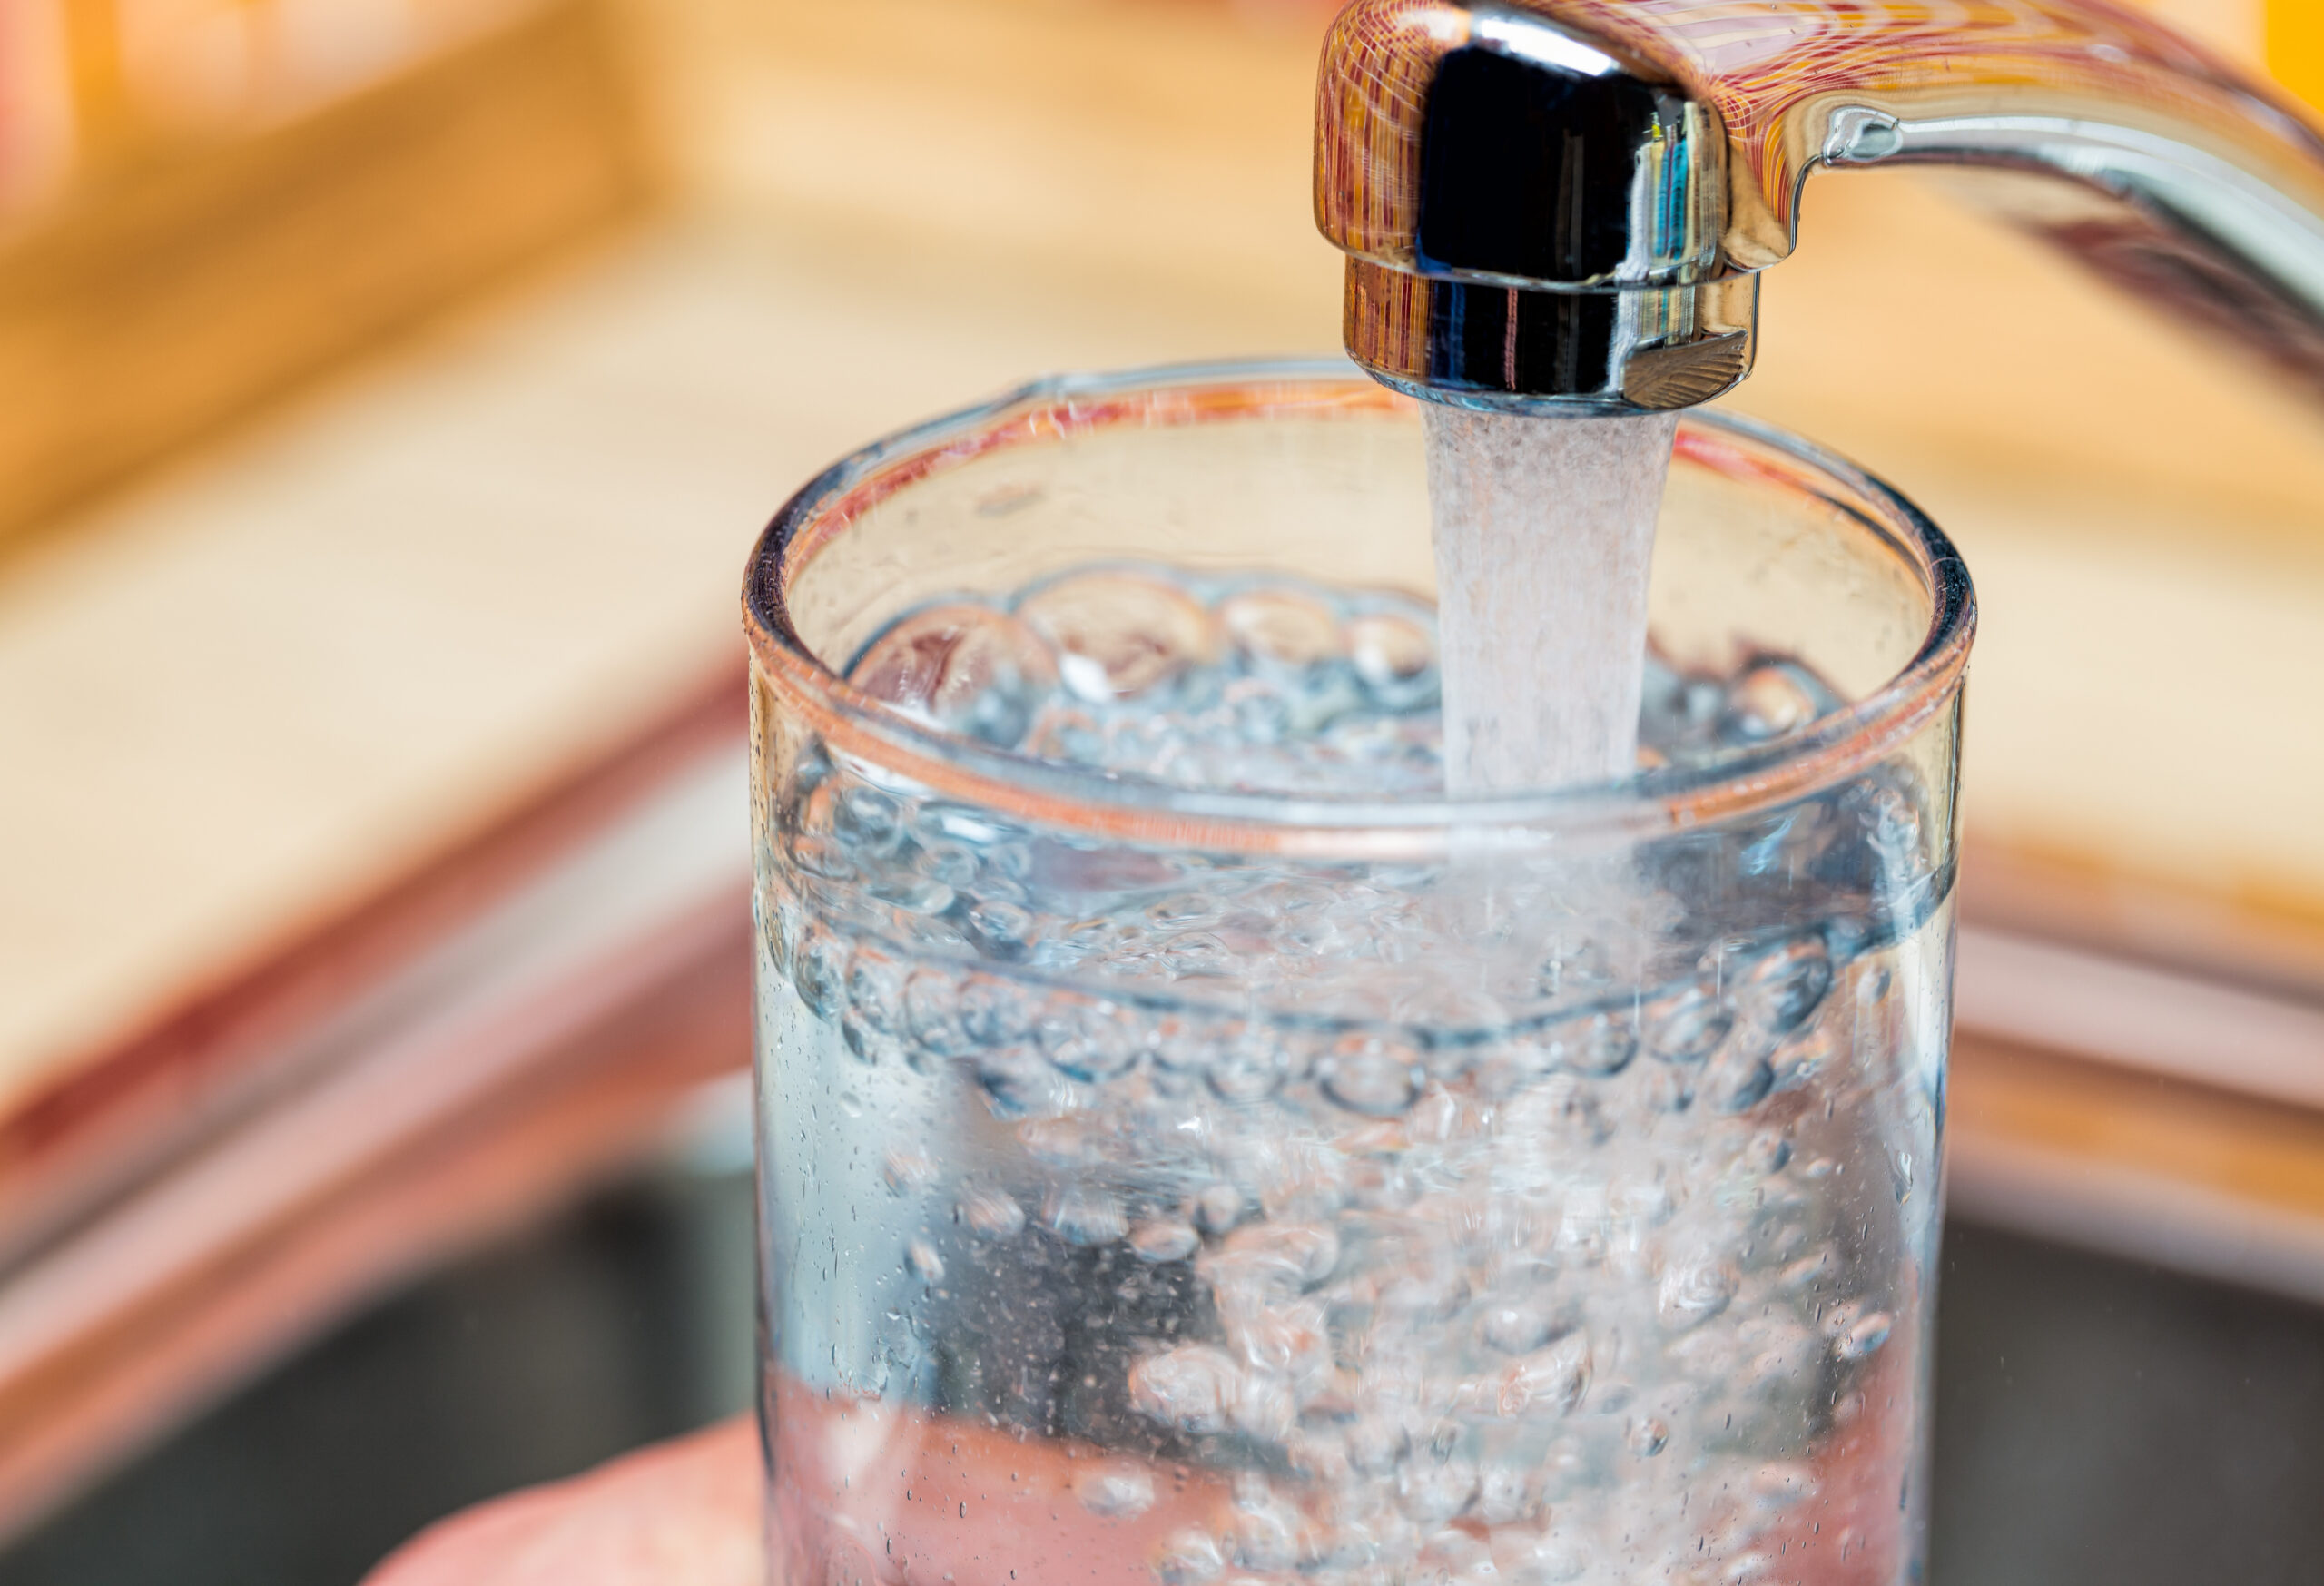 Toxic Contaminants Found In California’s Tap Water